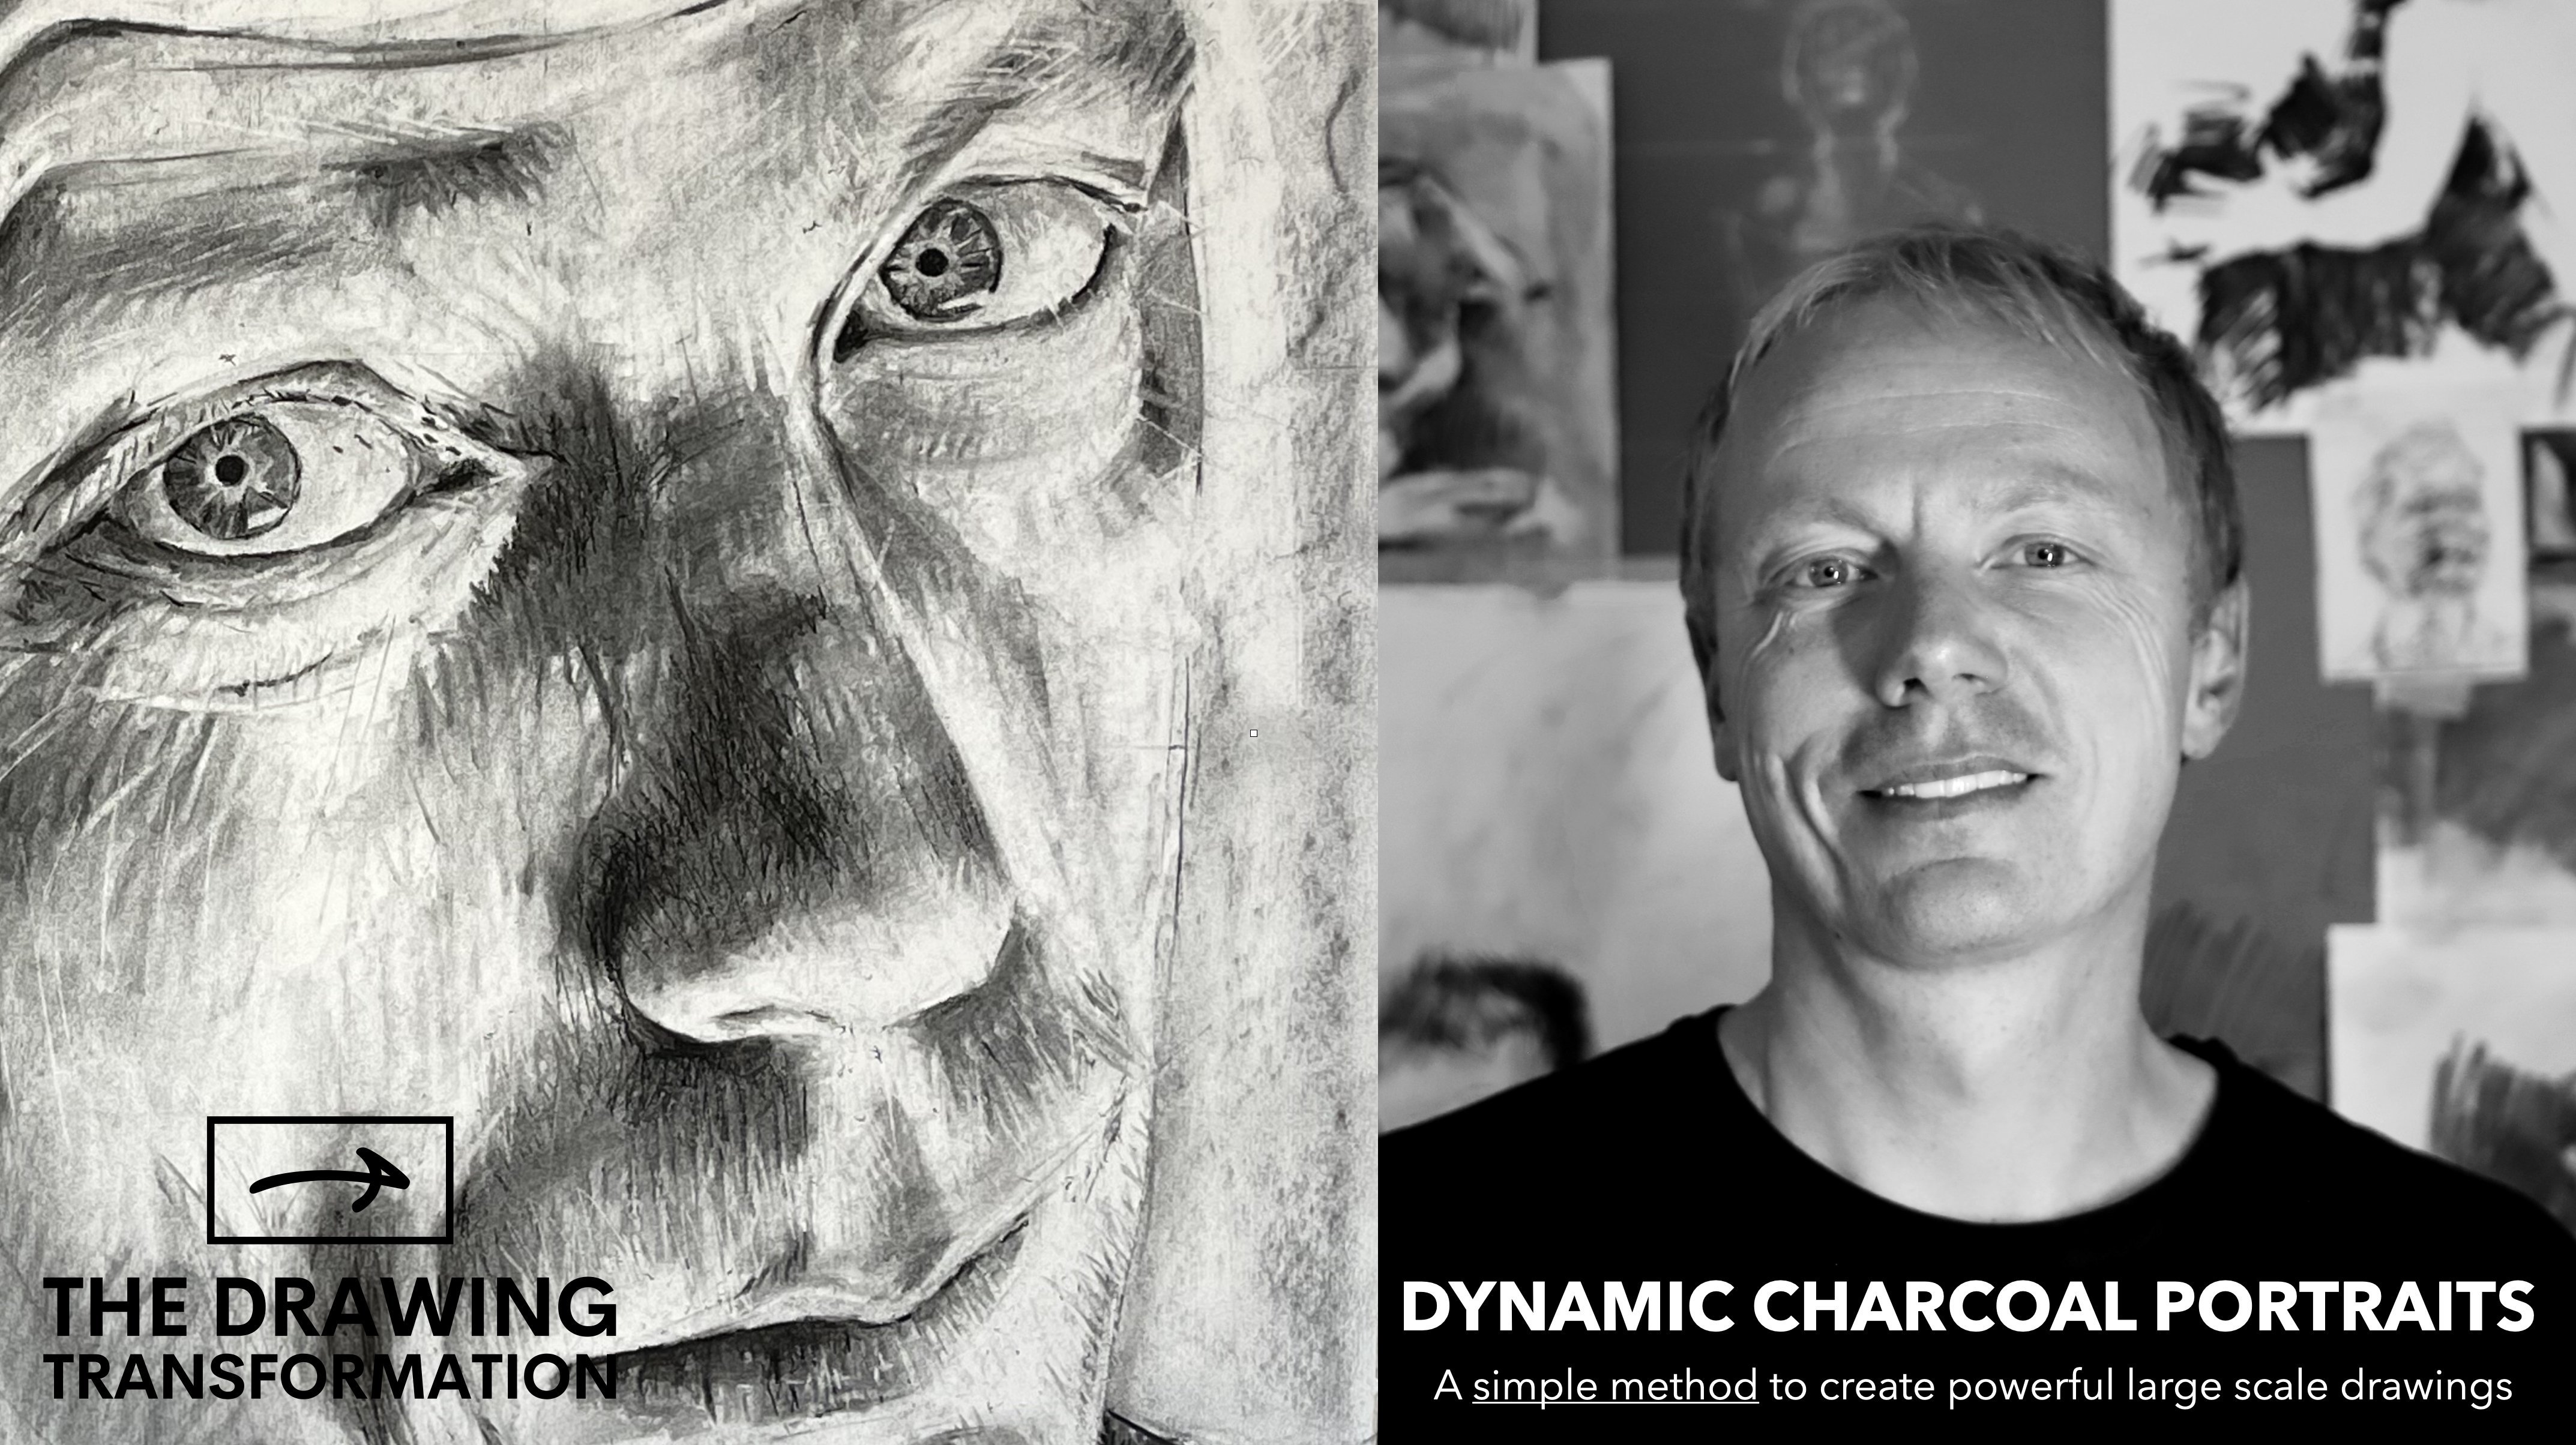 Dynamic charcoal portraiture: The simple method to create powerful large scale drawings.